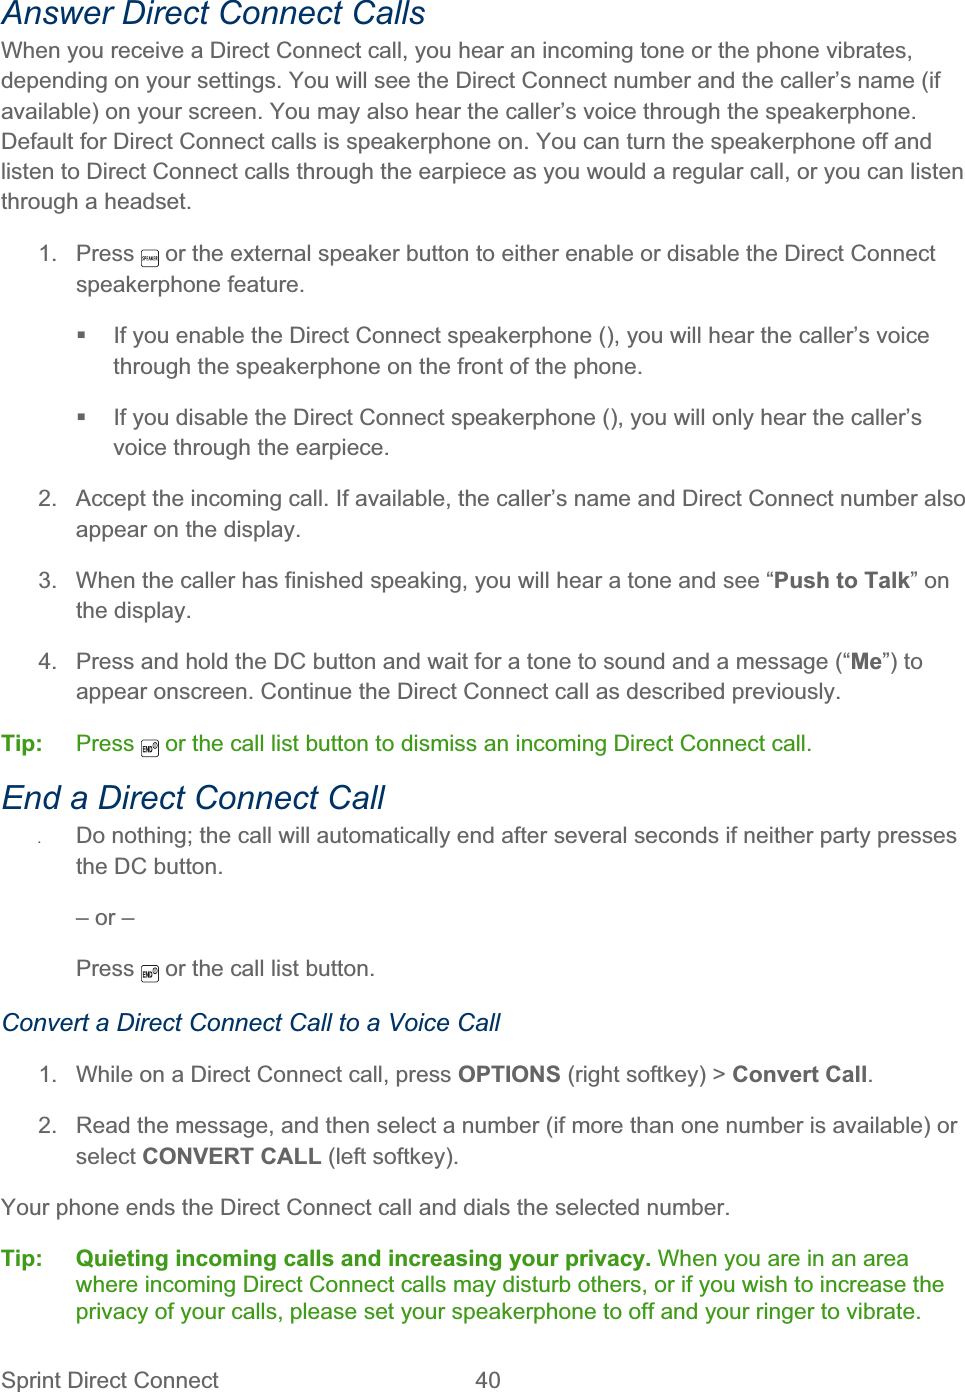 Sprint Direct Connect  40   Answer Direct Connect Calls When you receive a Direct Connect call, you hear an incoming tone or the phone vibrates, depending on your settings. You will see the Direct Connect number and the caller’s name (if available) on your screen. You may also hear the caller’s voice through the speakerphone. Default for Direct Connect calls is speakerphone on. You can turn the speakerphone off and listen to Direct Connect calls through the earpiece as you would a regular call, or you can listen through a headset. 1. Press   or the external speaker button to either enable or disable the Direct Connect speakerphone feature.   If you enable the Direct Connect speakerphone (), you will hear the caller’s voice through the speakerphone on the front of the phone.   If you disable the Direct Connect speakerphone (), you will only hear the caller’s voice through the earpiece. 2.  Accept the incoming call. If available, the caller’s name and Direct Connect number also appear on the display. 3.  When the caller has finished speaking, you will hear a tone and see “Push to Talk” on the display. 4.  Press and hold the DC button and wait for a tone to sound and a message (“Me”) to appear onscreen. Continue the Direct Connect call as described previously. Tip:   Press   or the call list button to dismiss an incoming Direct Connect call. End a Direct Connect Call ʇDo nothing; the call will automatically end after several seconds if neither party presses the DC button. – or –  Press  or the call list button. Convert a Direct Connect Call to a Voice Call 1.  While on a Direct Connect call, press OPTIONS (right softkey) &gt; Convert Call.2.  Read the message, and then select a number (if more than one number is available) or select CONVERT CALL (left softkey). Your phone ends the Direct Connect call and dials the selected number. Tip: Quieting incoming calls and increasing your privacy. When you are in an area where incoming Direct Connect calls may disturb others, or if you wish to increase the privacy of your calls, please set your speakerphone to off and your ringer to vibrate. 